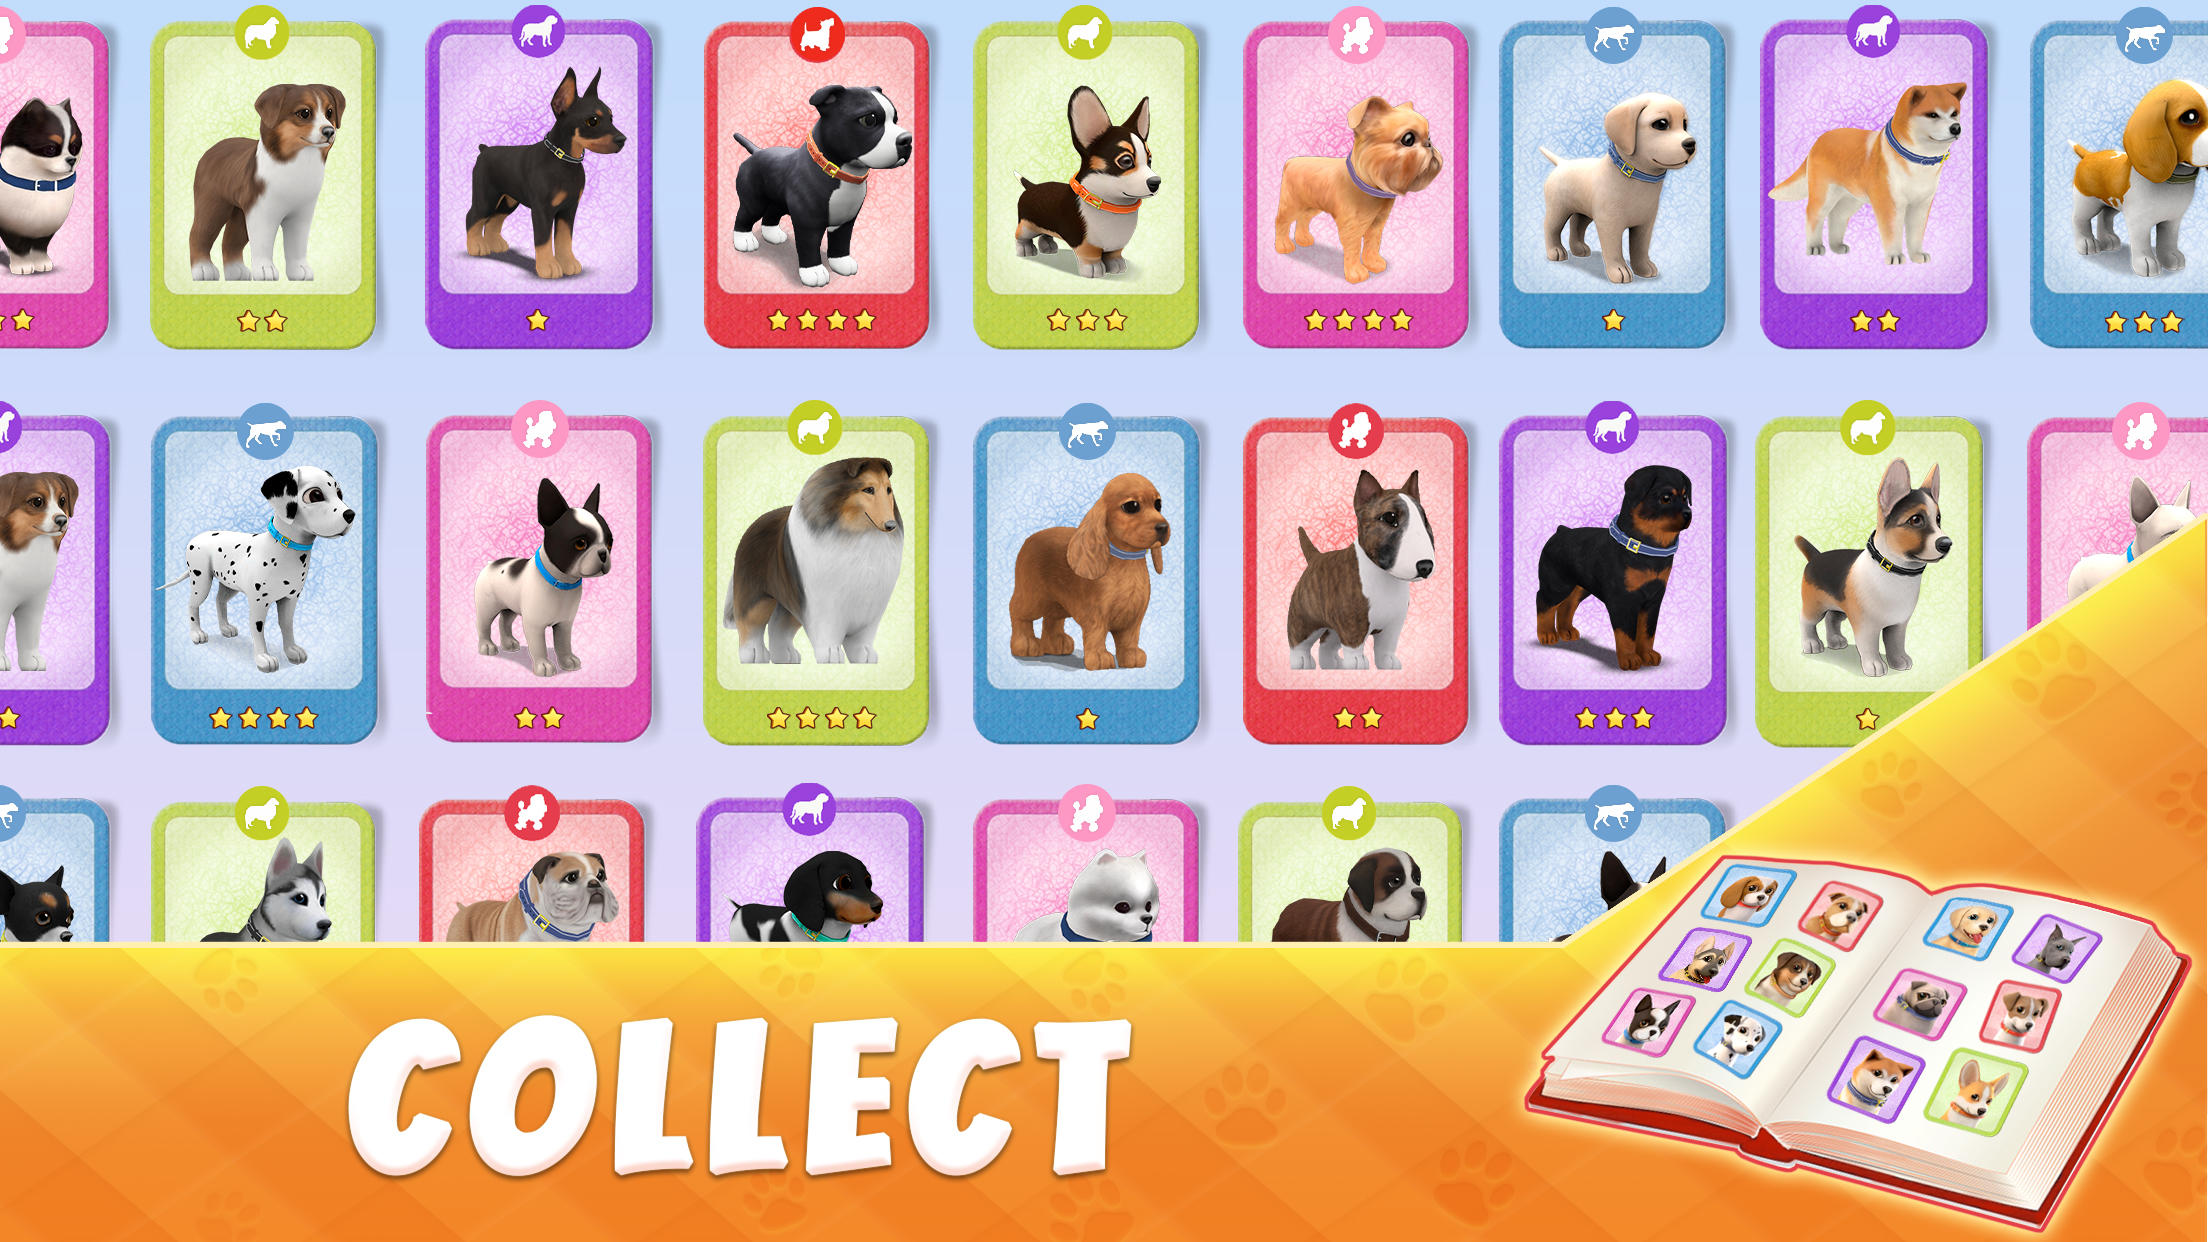 Dog Town: Pet Shop Game, Care & Play with Dogのキャプチャ